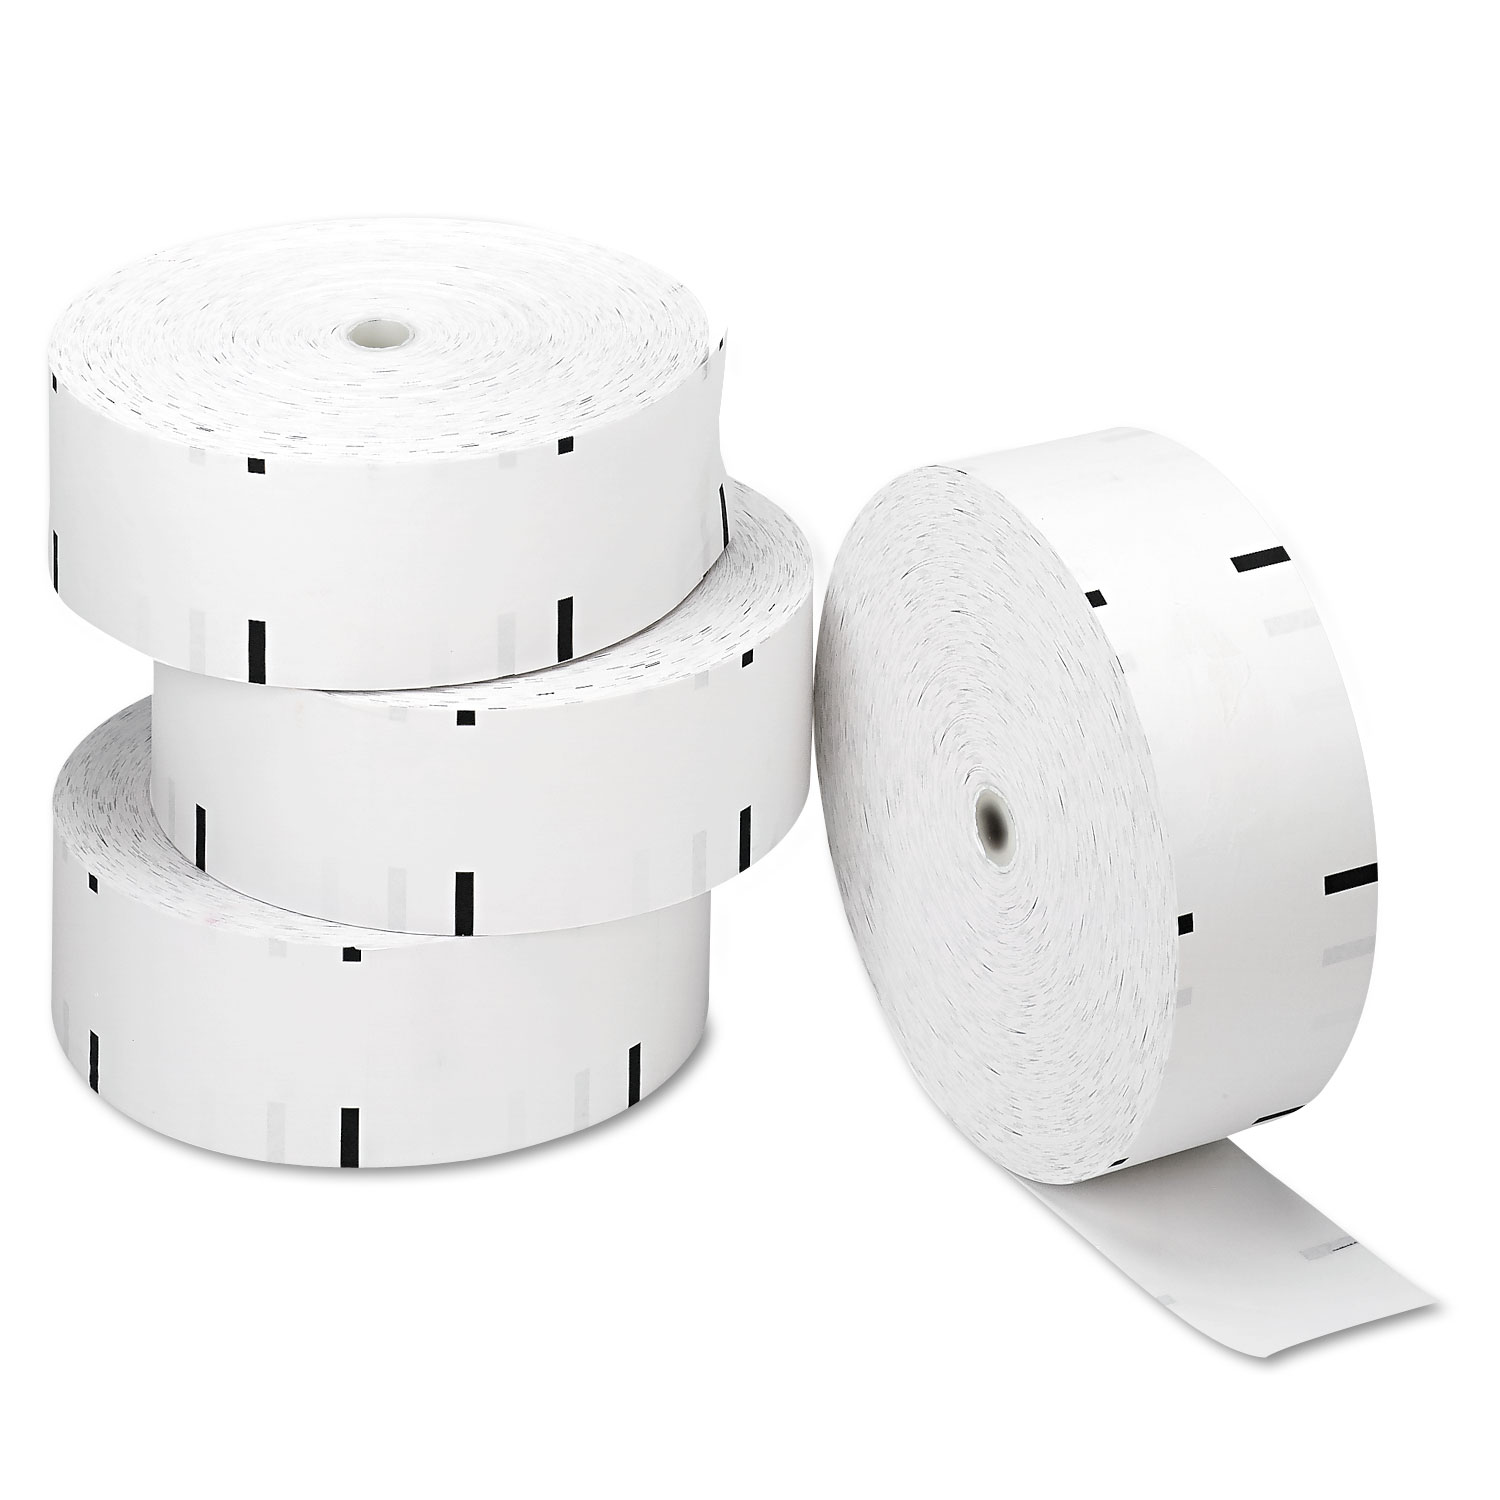  Iconex 6507 Direct Thermal Printing Paper Rolls, 0.69 Core, 3.13 x 1960 ft, White, 4/Carton (ICX90930002) 